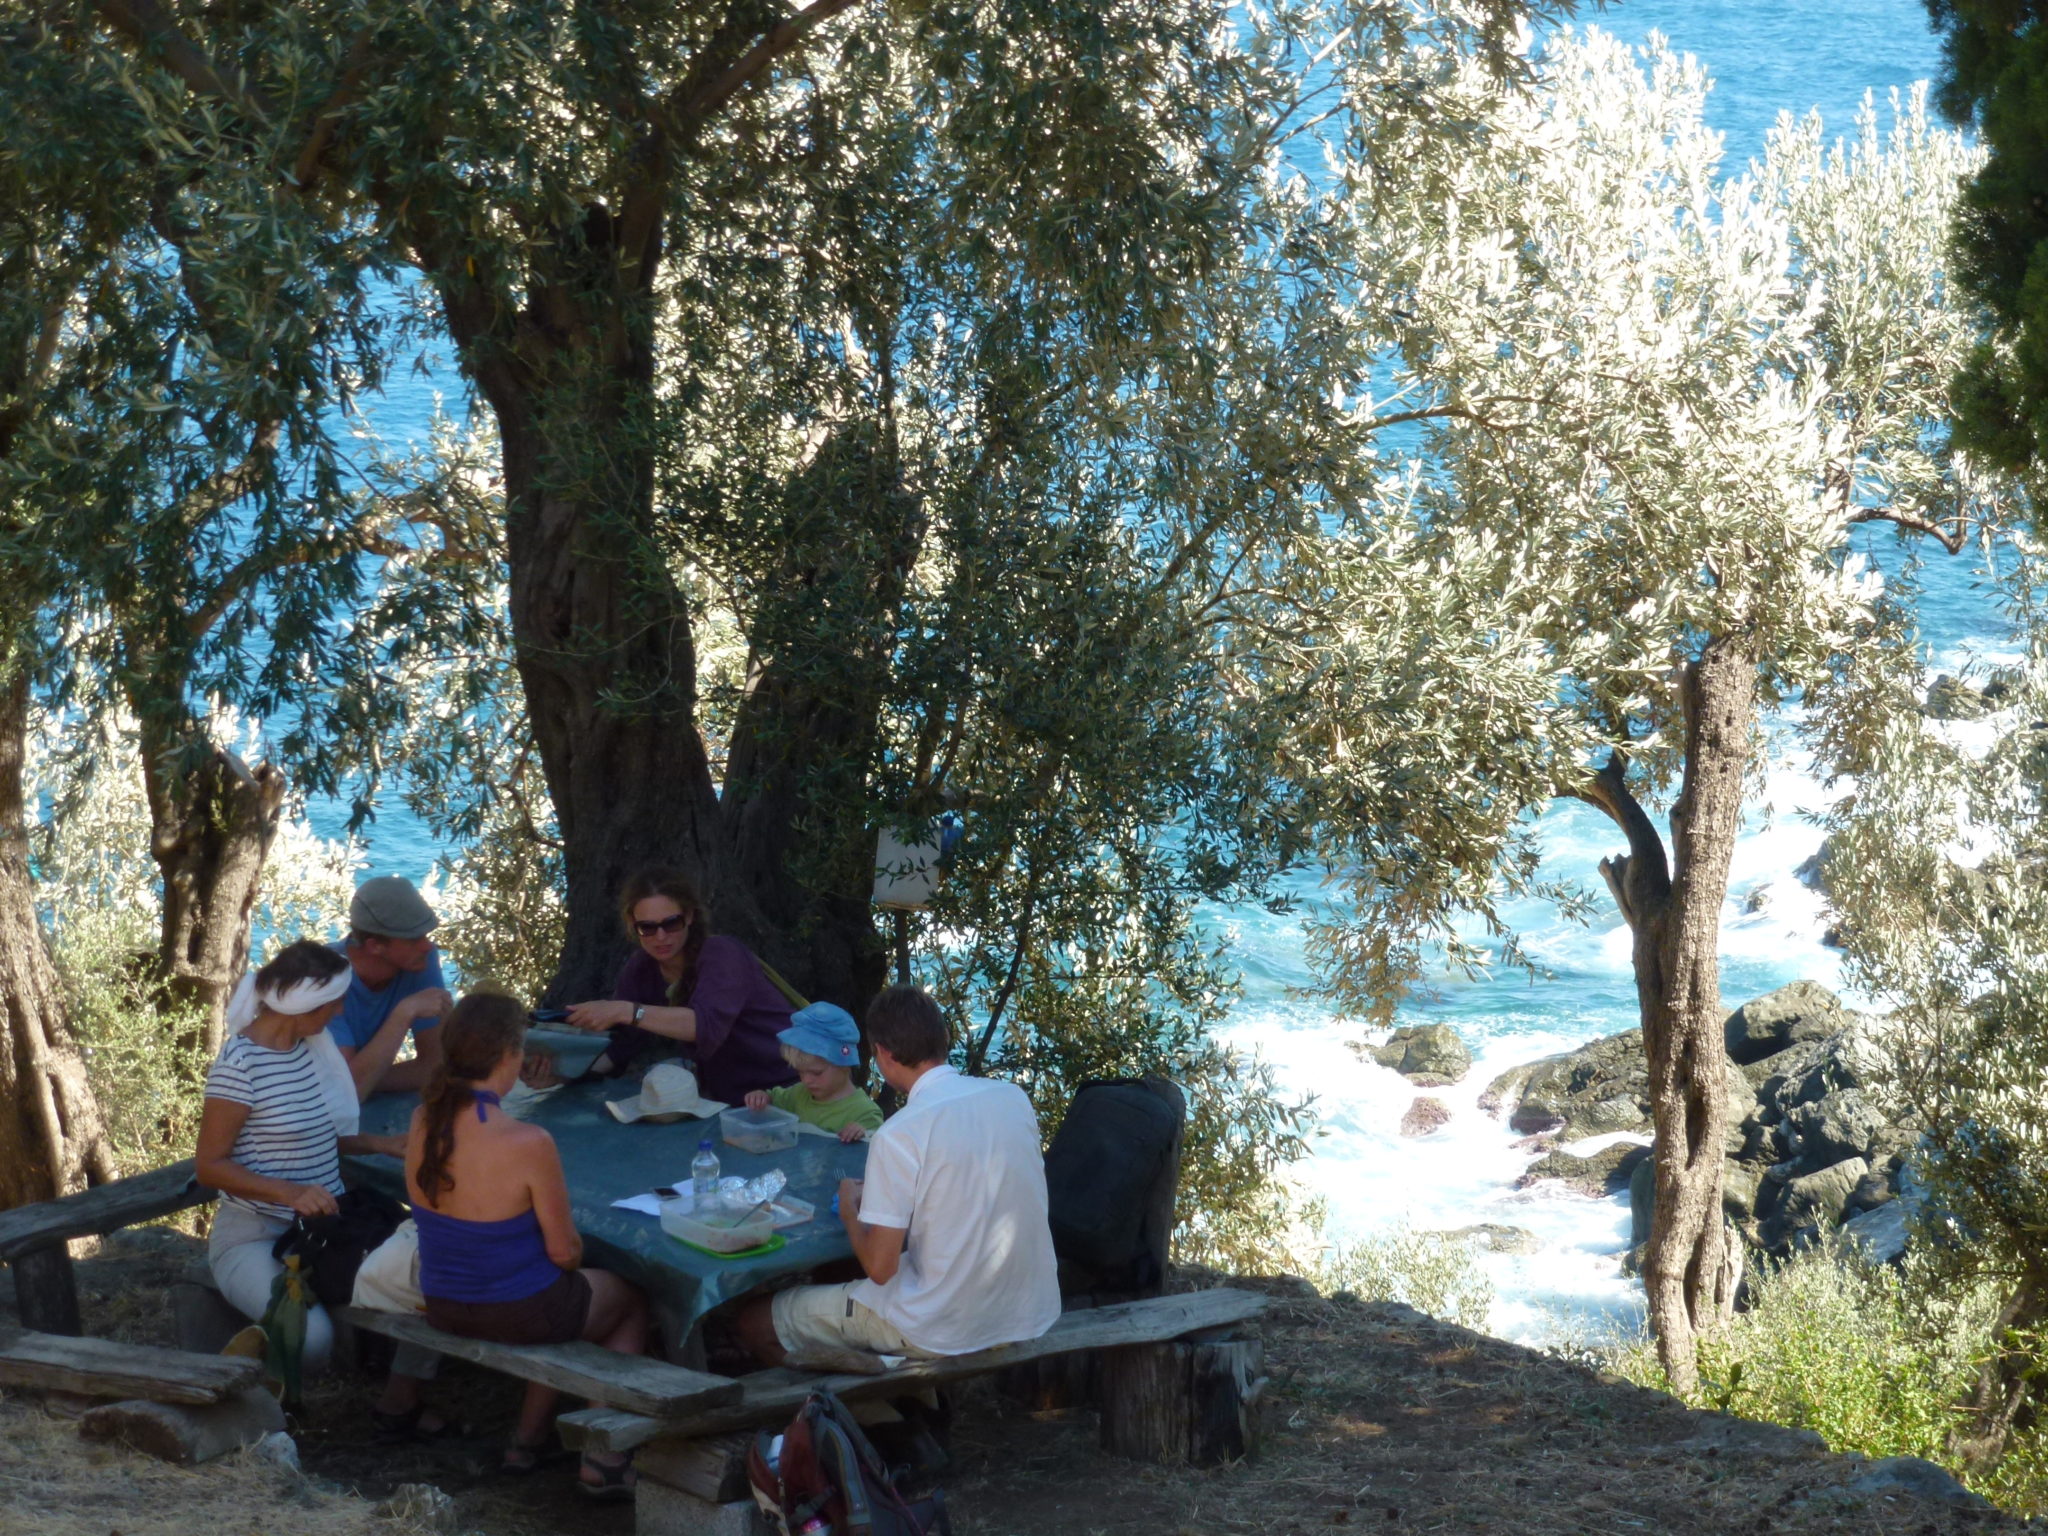 A gorgeous church overlooking the cliffs is where we stop for lunch on the walk from Pouri to Horefto